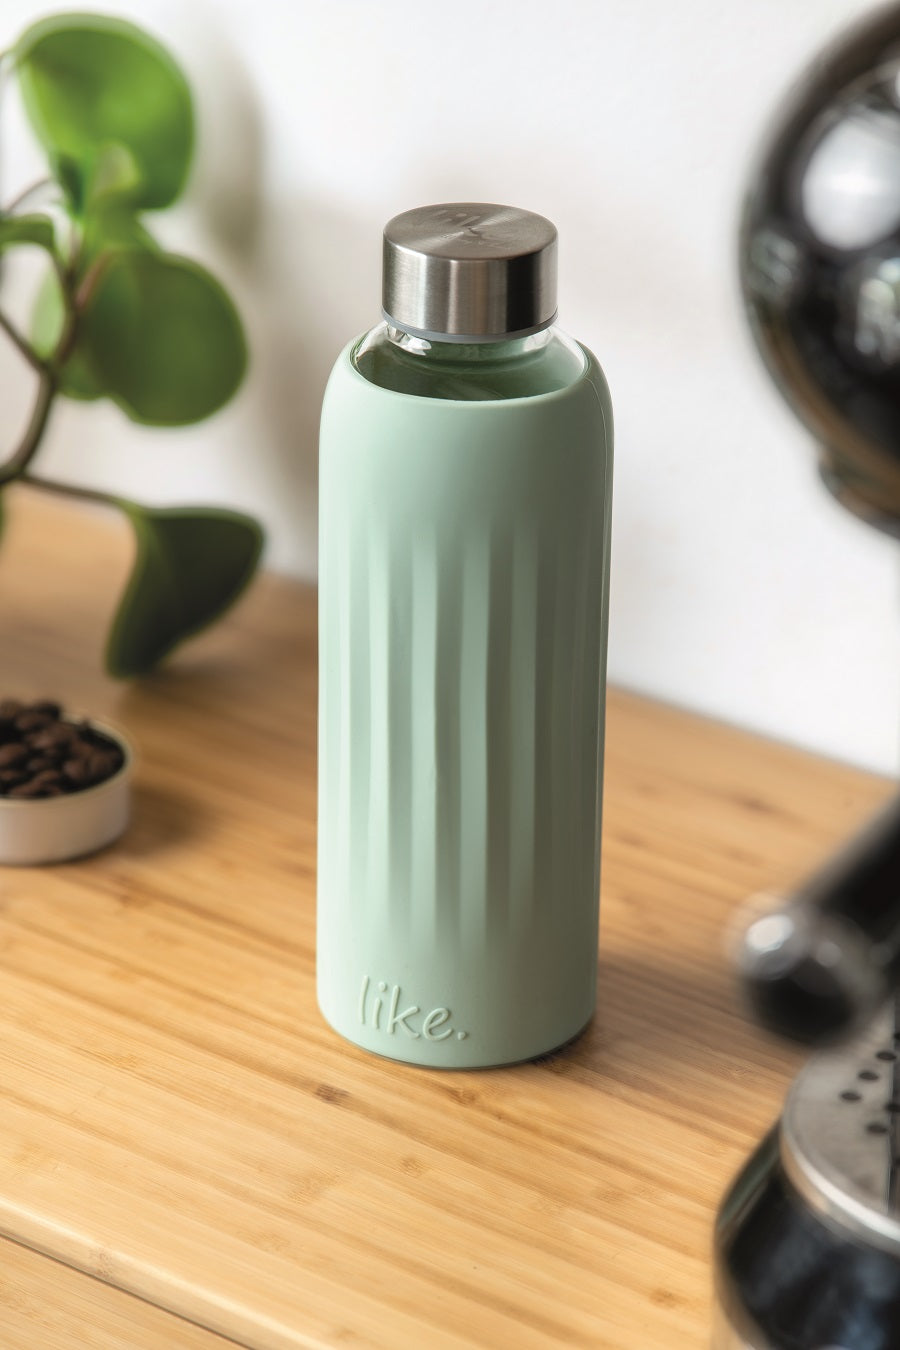 Likes. by Villeroy &amp; Boch ToGo&amp;ToStay glass drinking bottle, 0,5l, with silicone coating, mint green